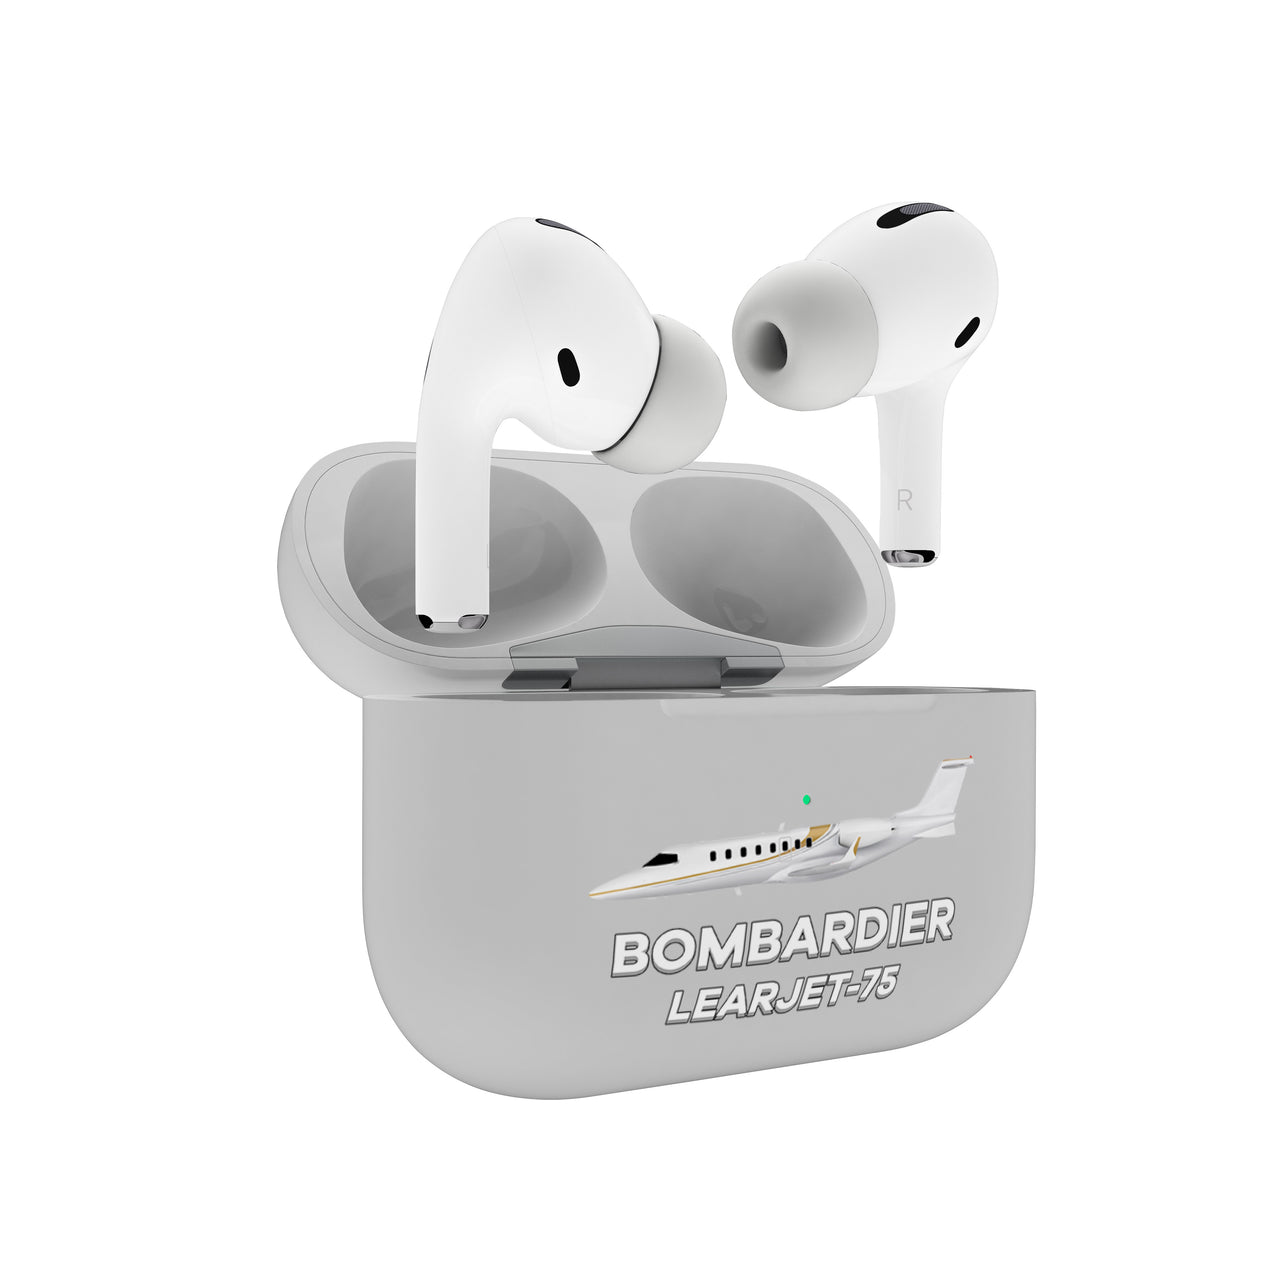 The Bombardier Learjet 75 Designed AirPods "Pro" Cases